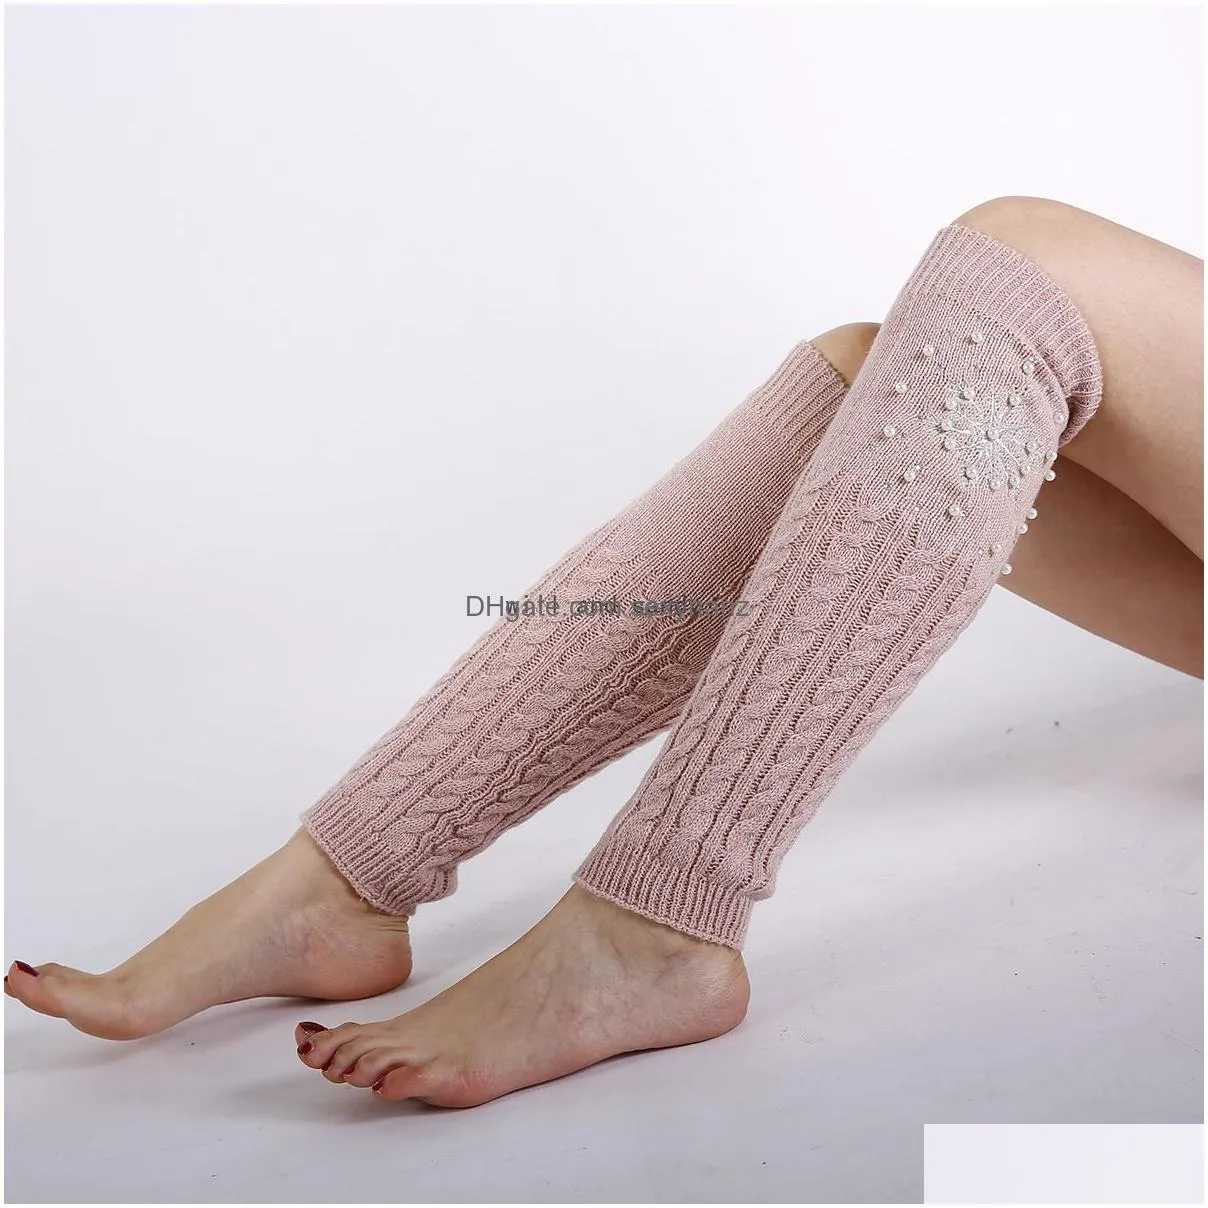 pearl snowflake knee high cashmere leg warmers socks knit boot cuffs toppers leggings women girls autumn winter loose stockings white black will and